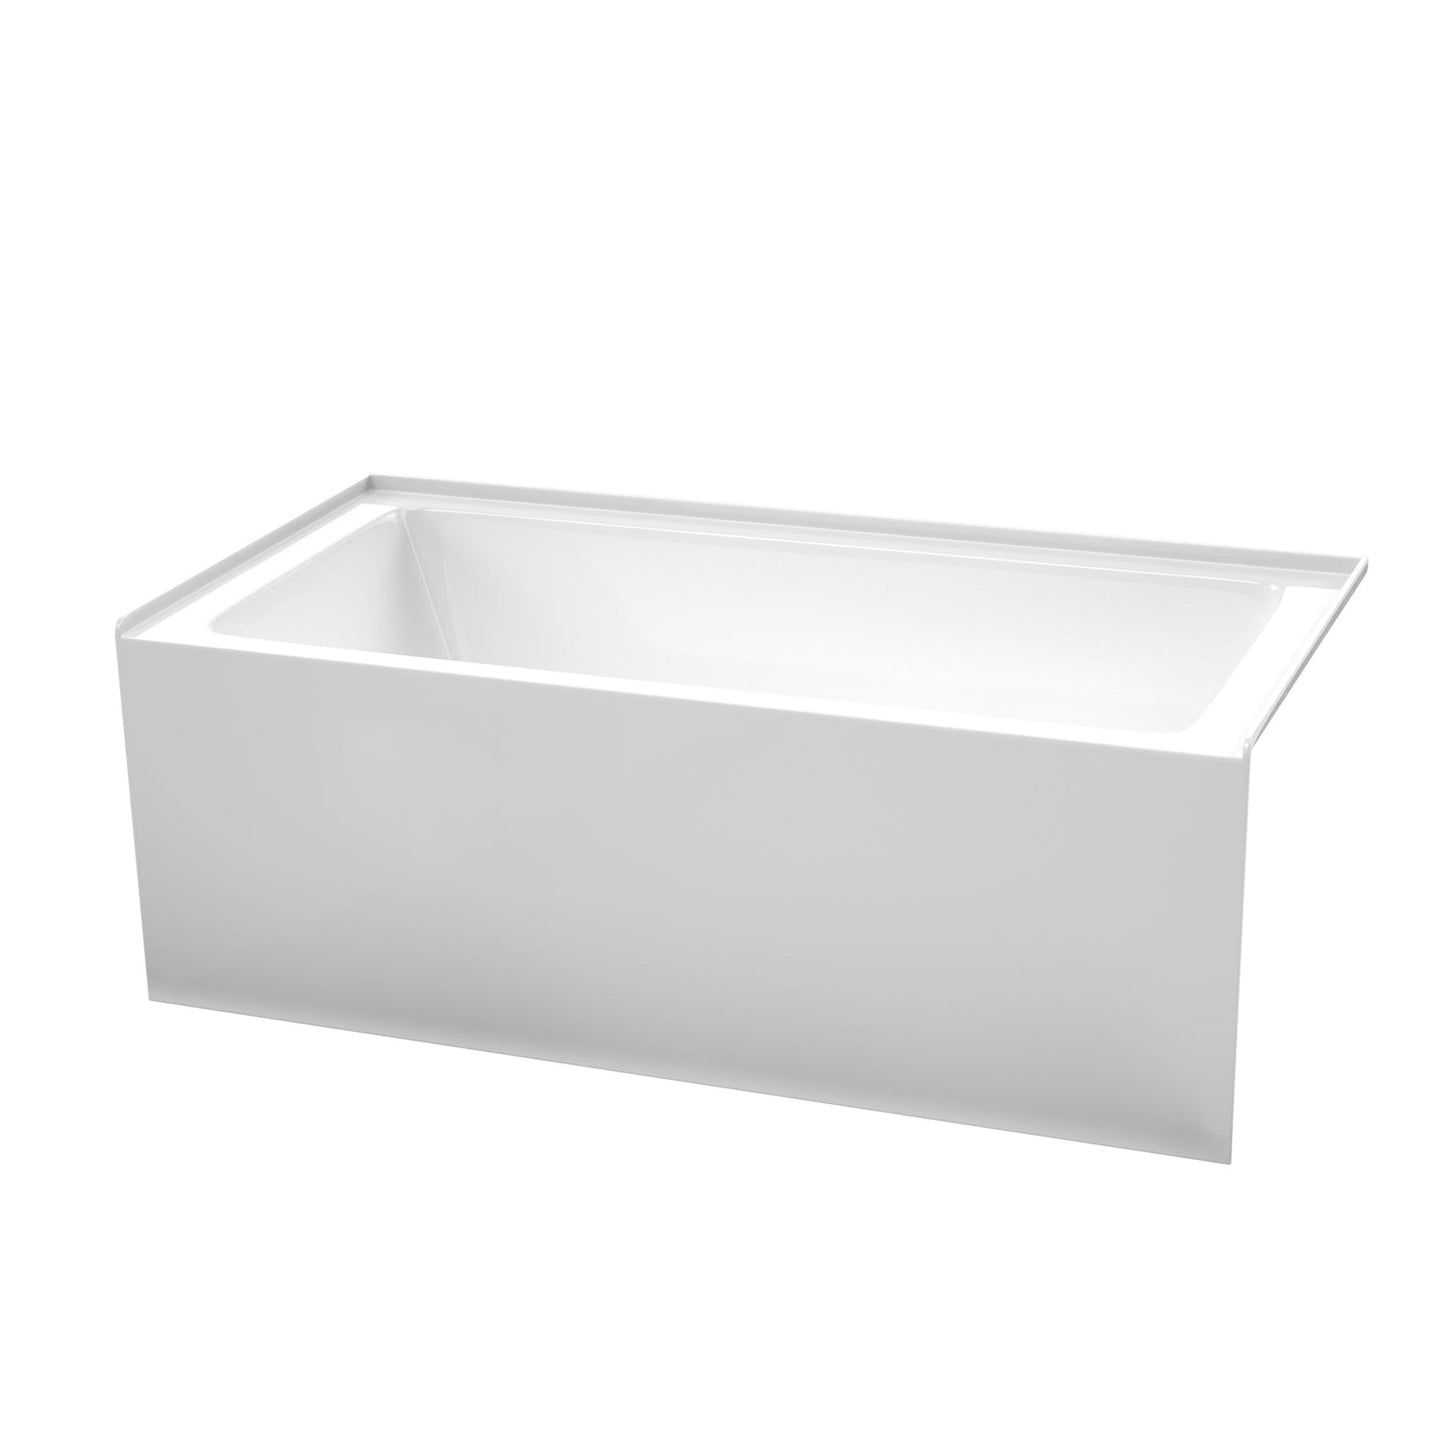 Wyndham Collection Grayley 60" x 30" Alcove Bathtub in White With Right-Hand Drain and Overflow Trim in Matte Black